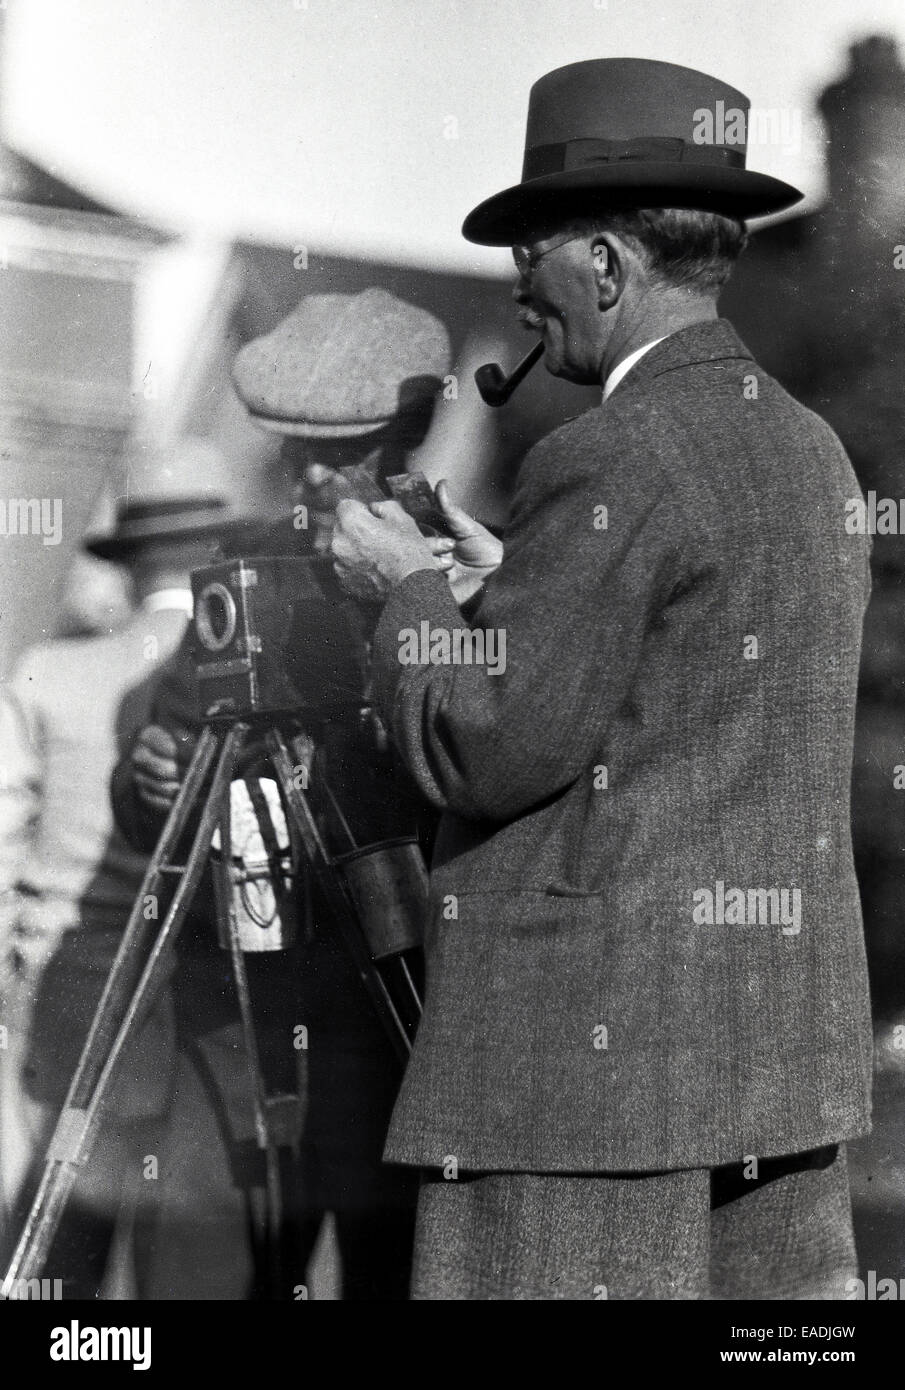 1930s, Historical picture showing a gentleman photographer wearing a suit, a hat and pipe, with his assistant standing by the camera which is on a tripod. The photographer is looking at two images in his hands, which are possibly glass negatives, Stock Photo